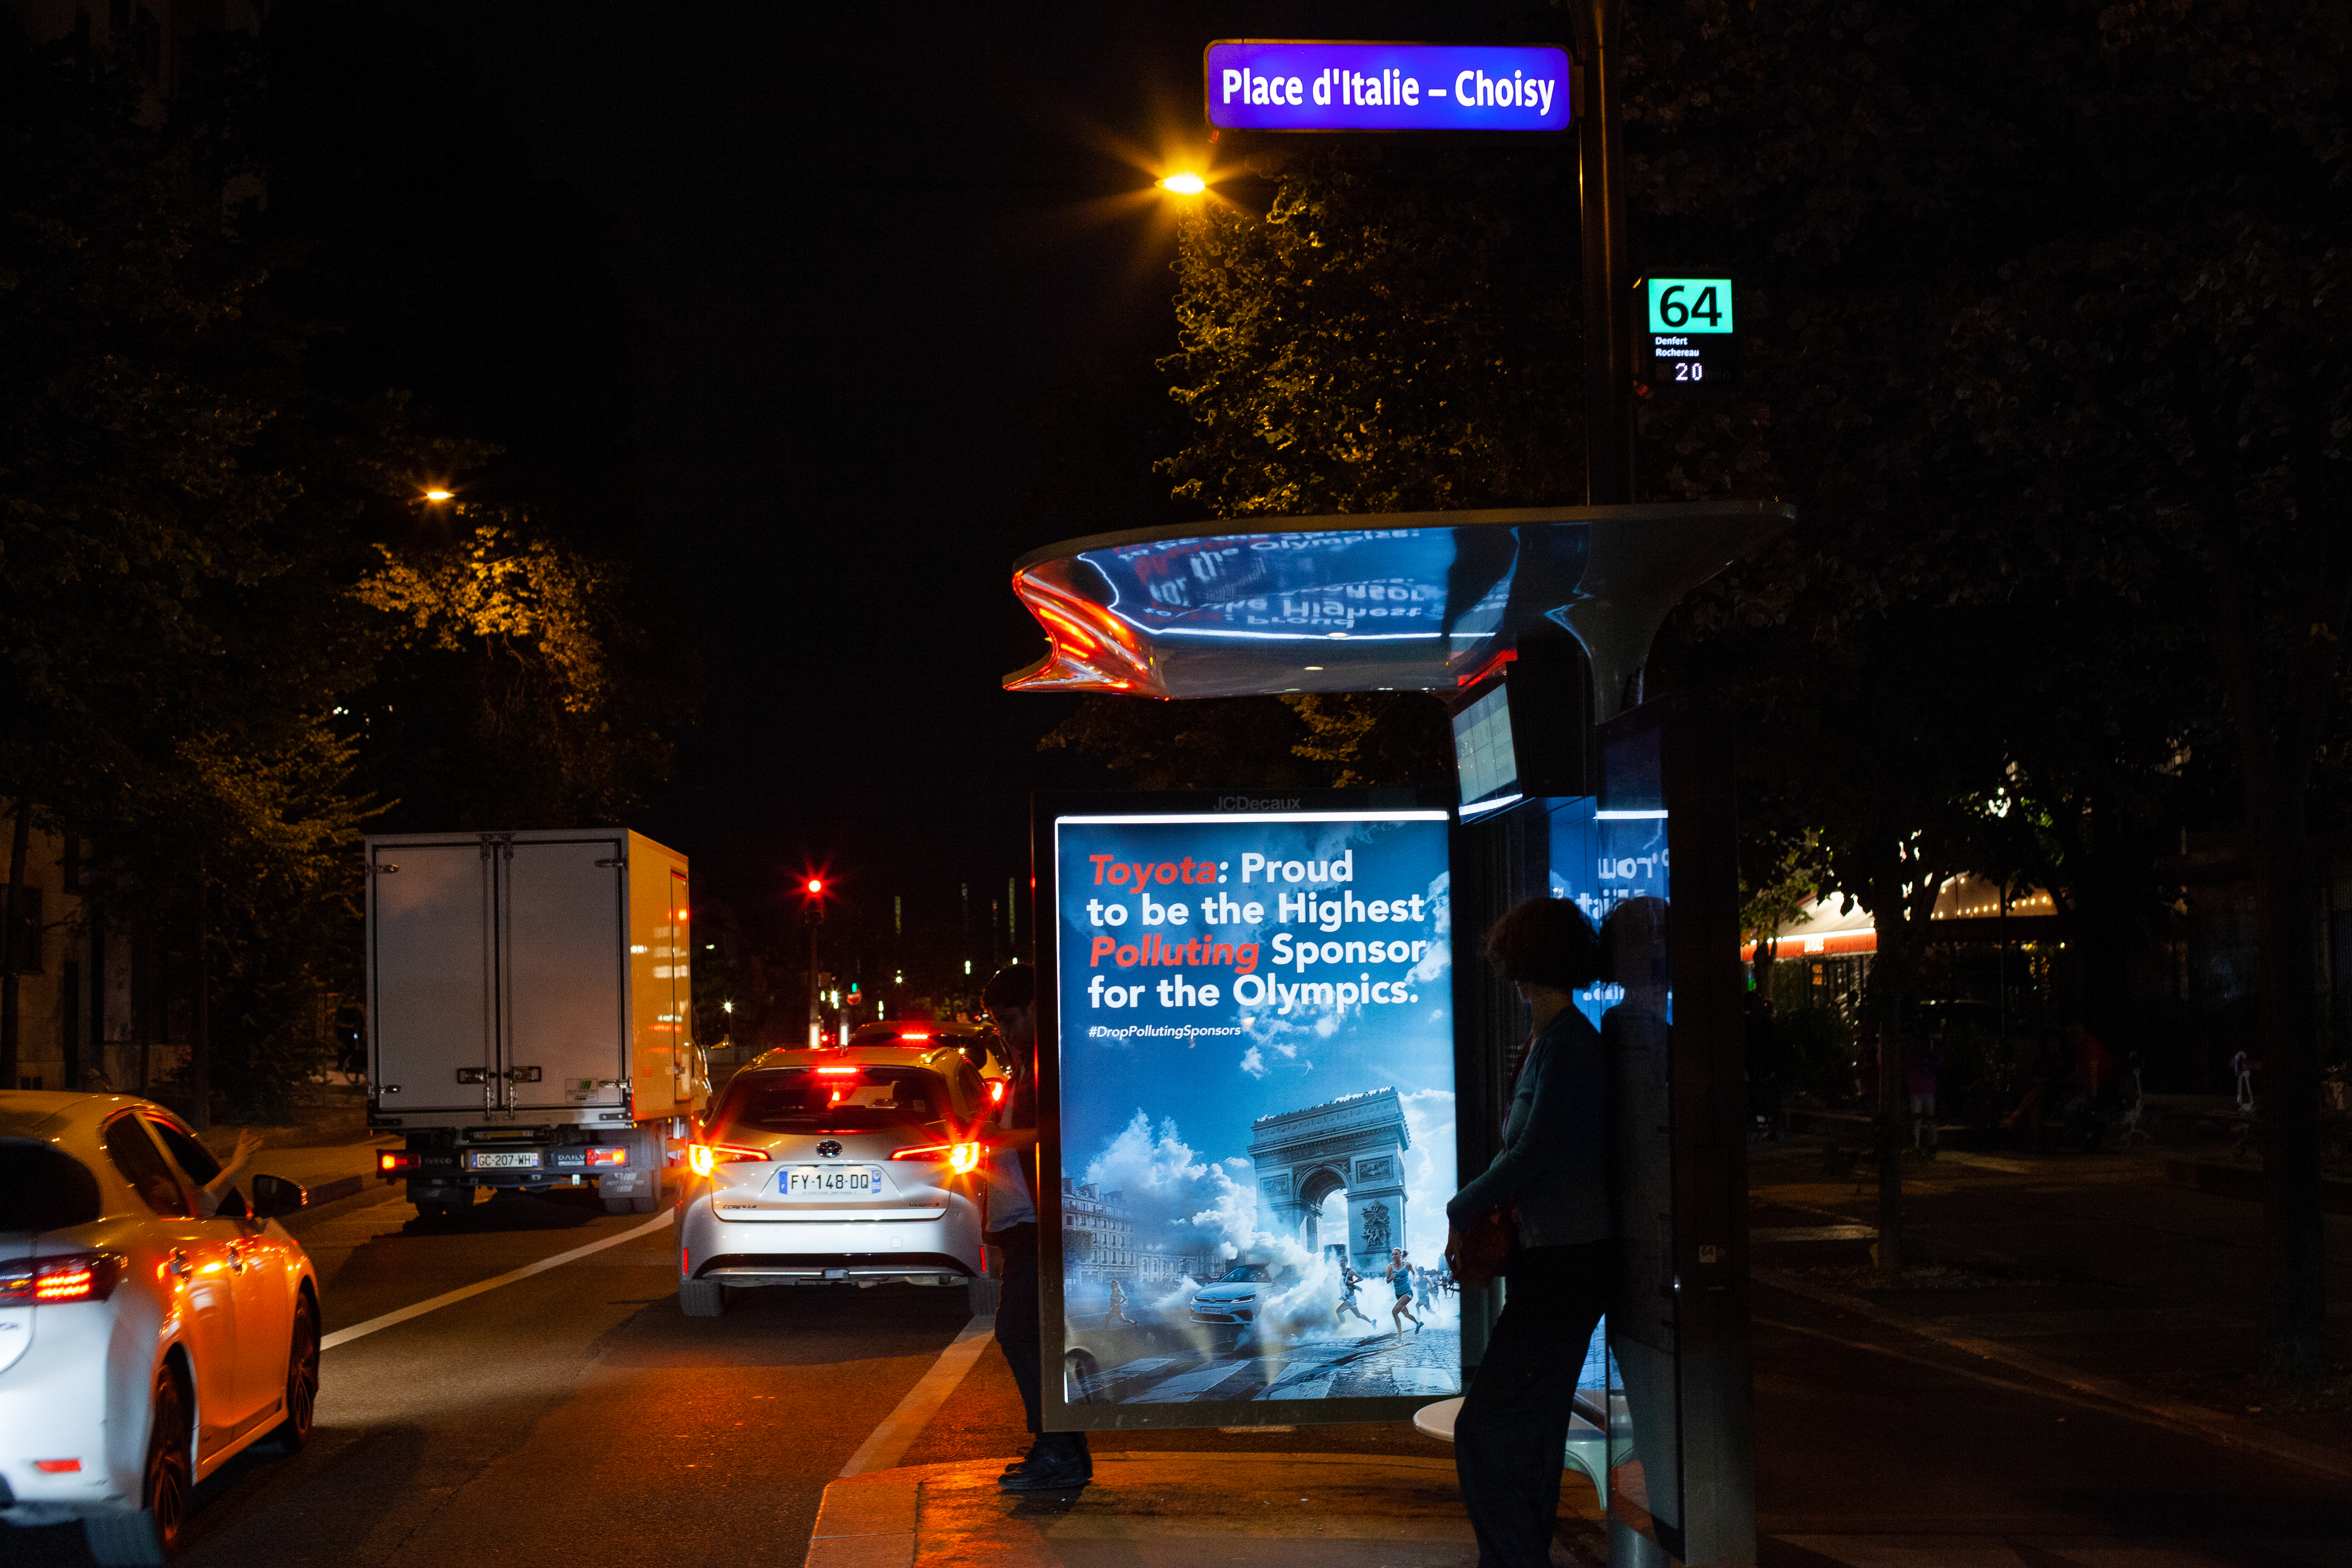 A mock advert for Toyota in protest of its Paris 2024 sponsorship in a bus stop in Place d'Italie/Paris